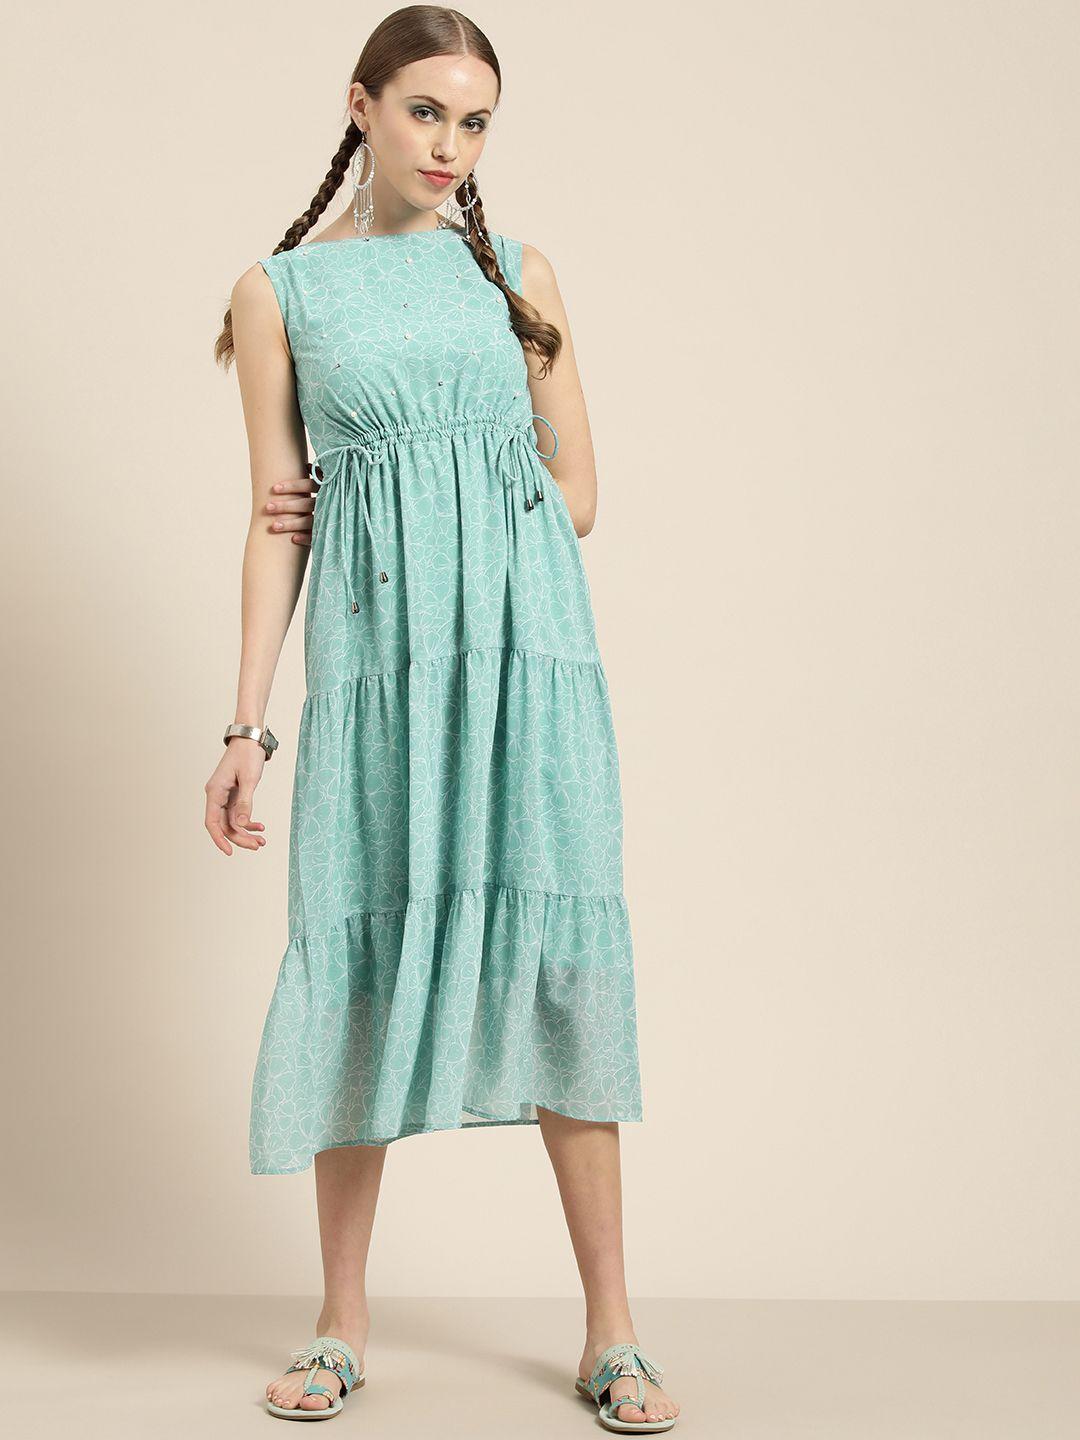 sangria-women-sea-green-&-white-floral-printed-ethnic-a-line-dress